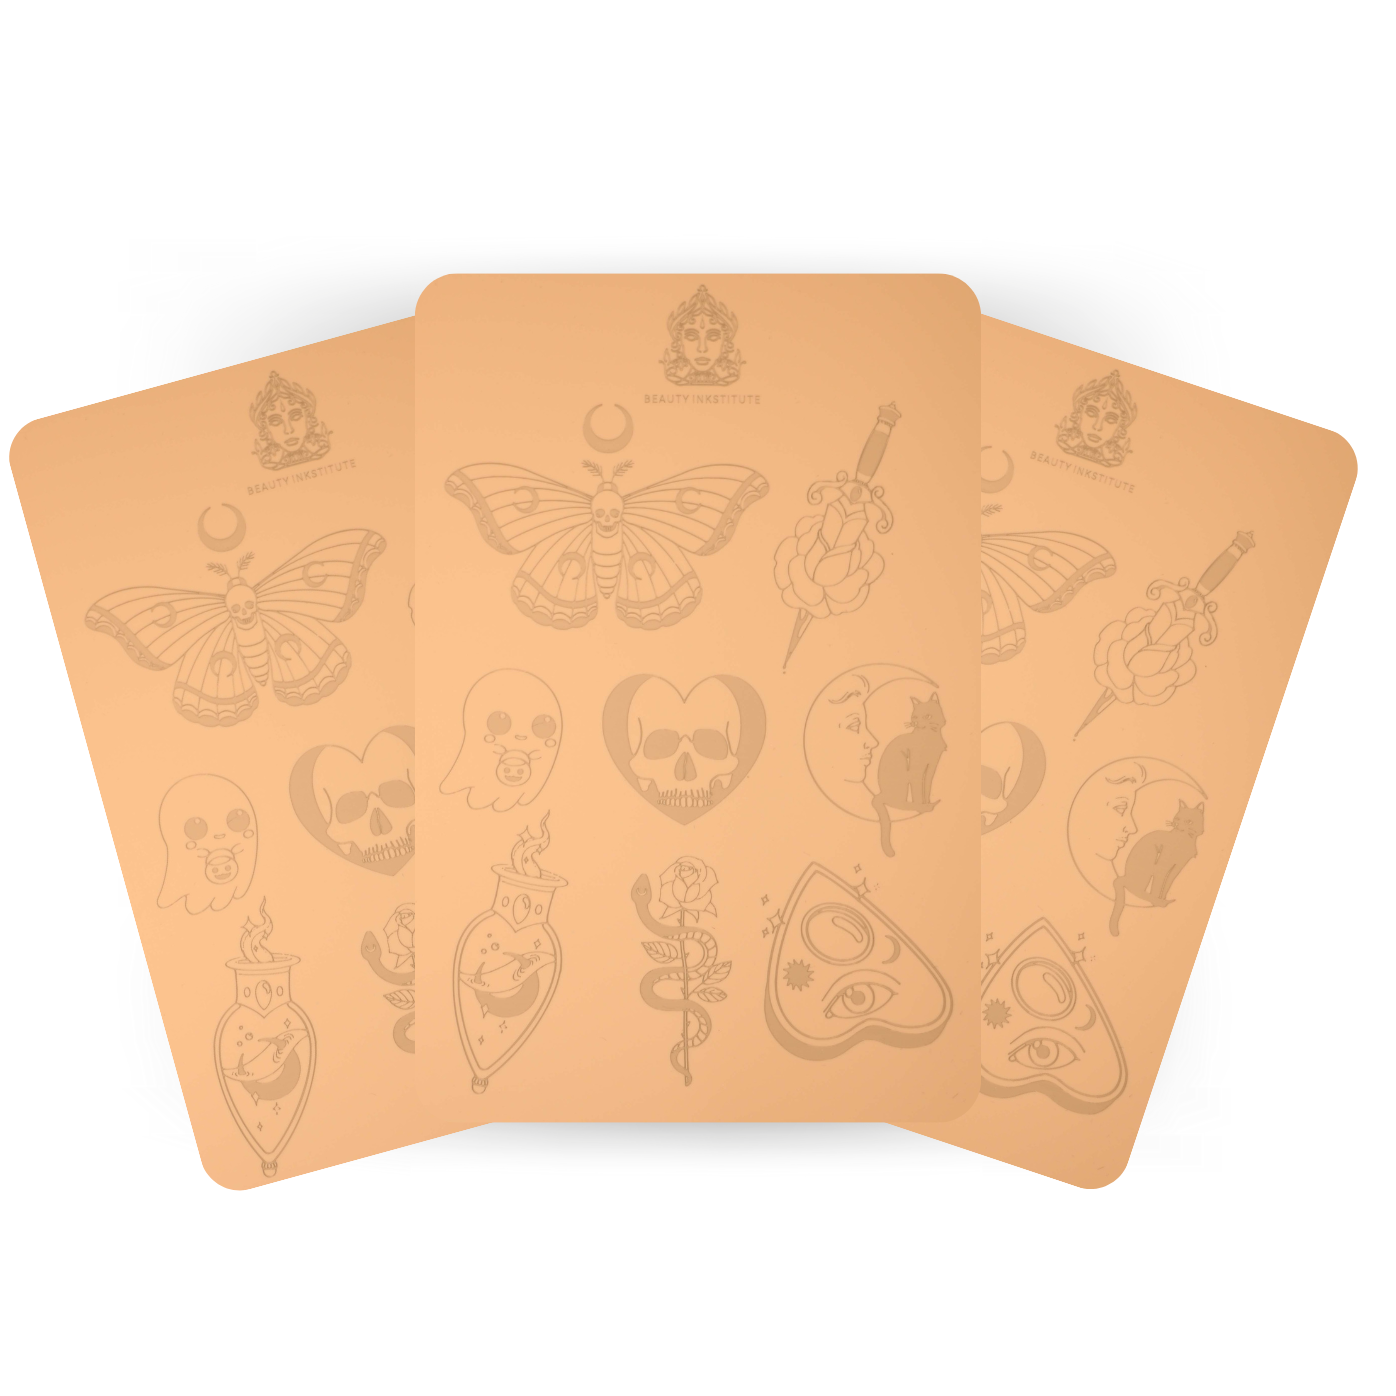 3 Pack: Spooky Printed Silicone Skins